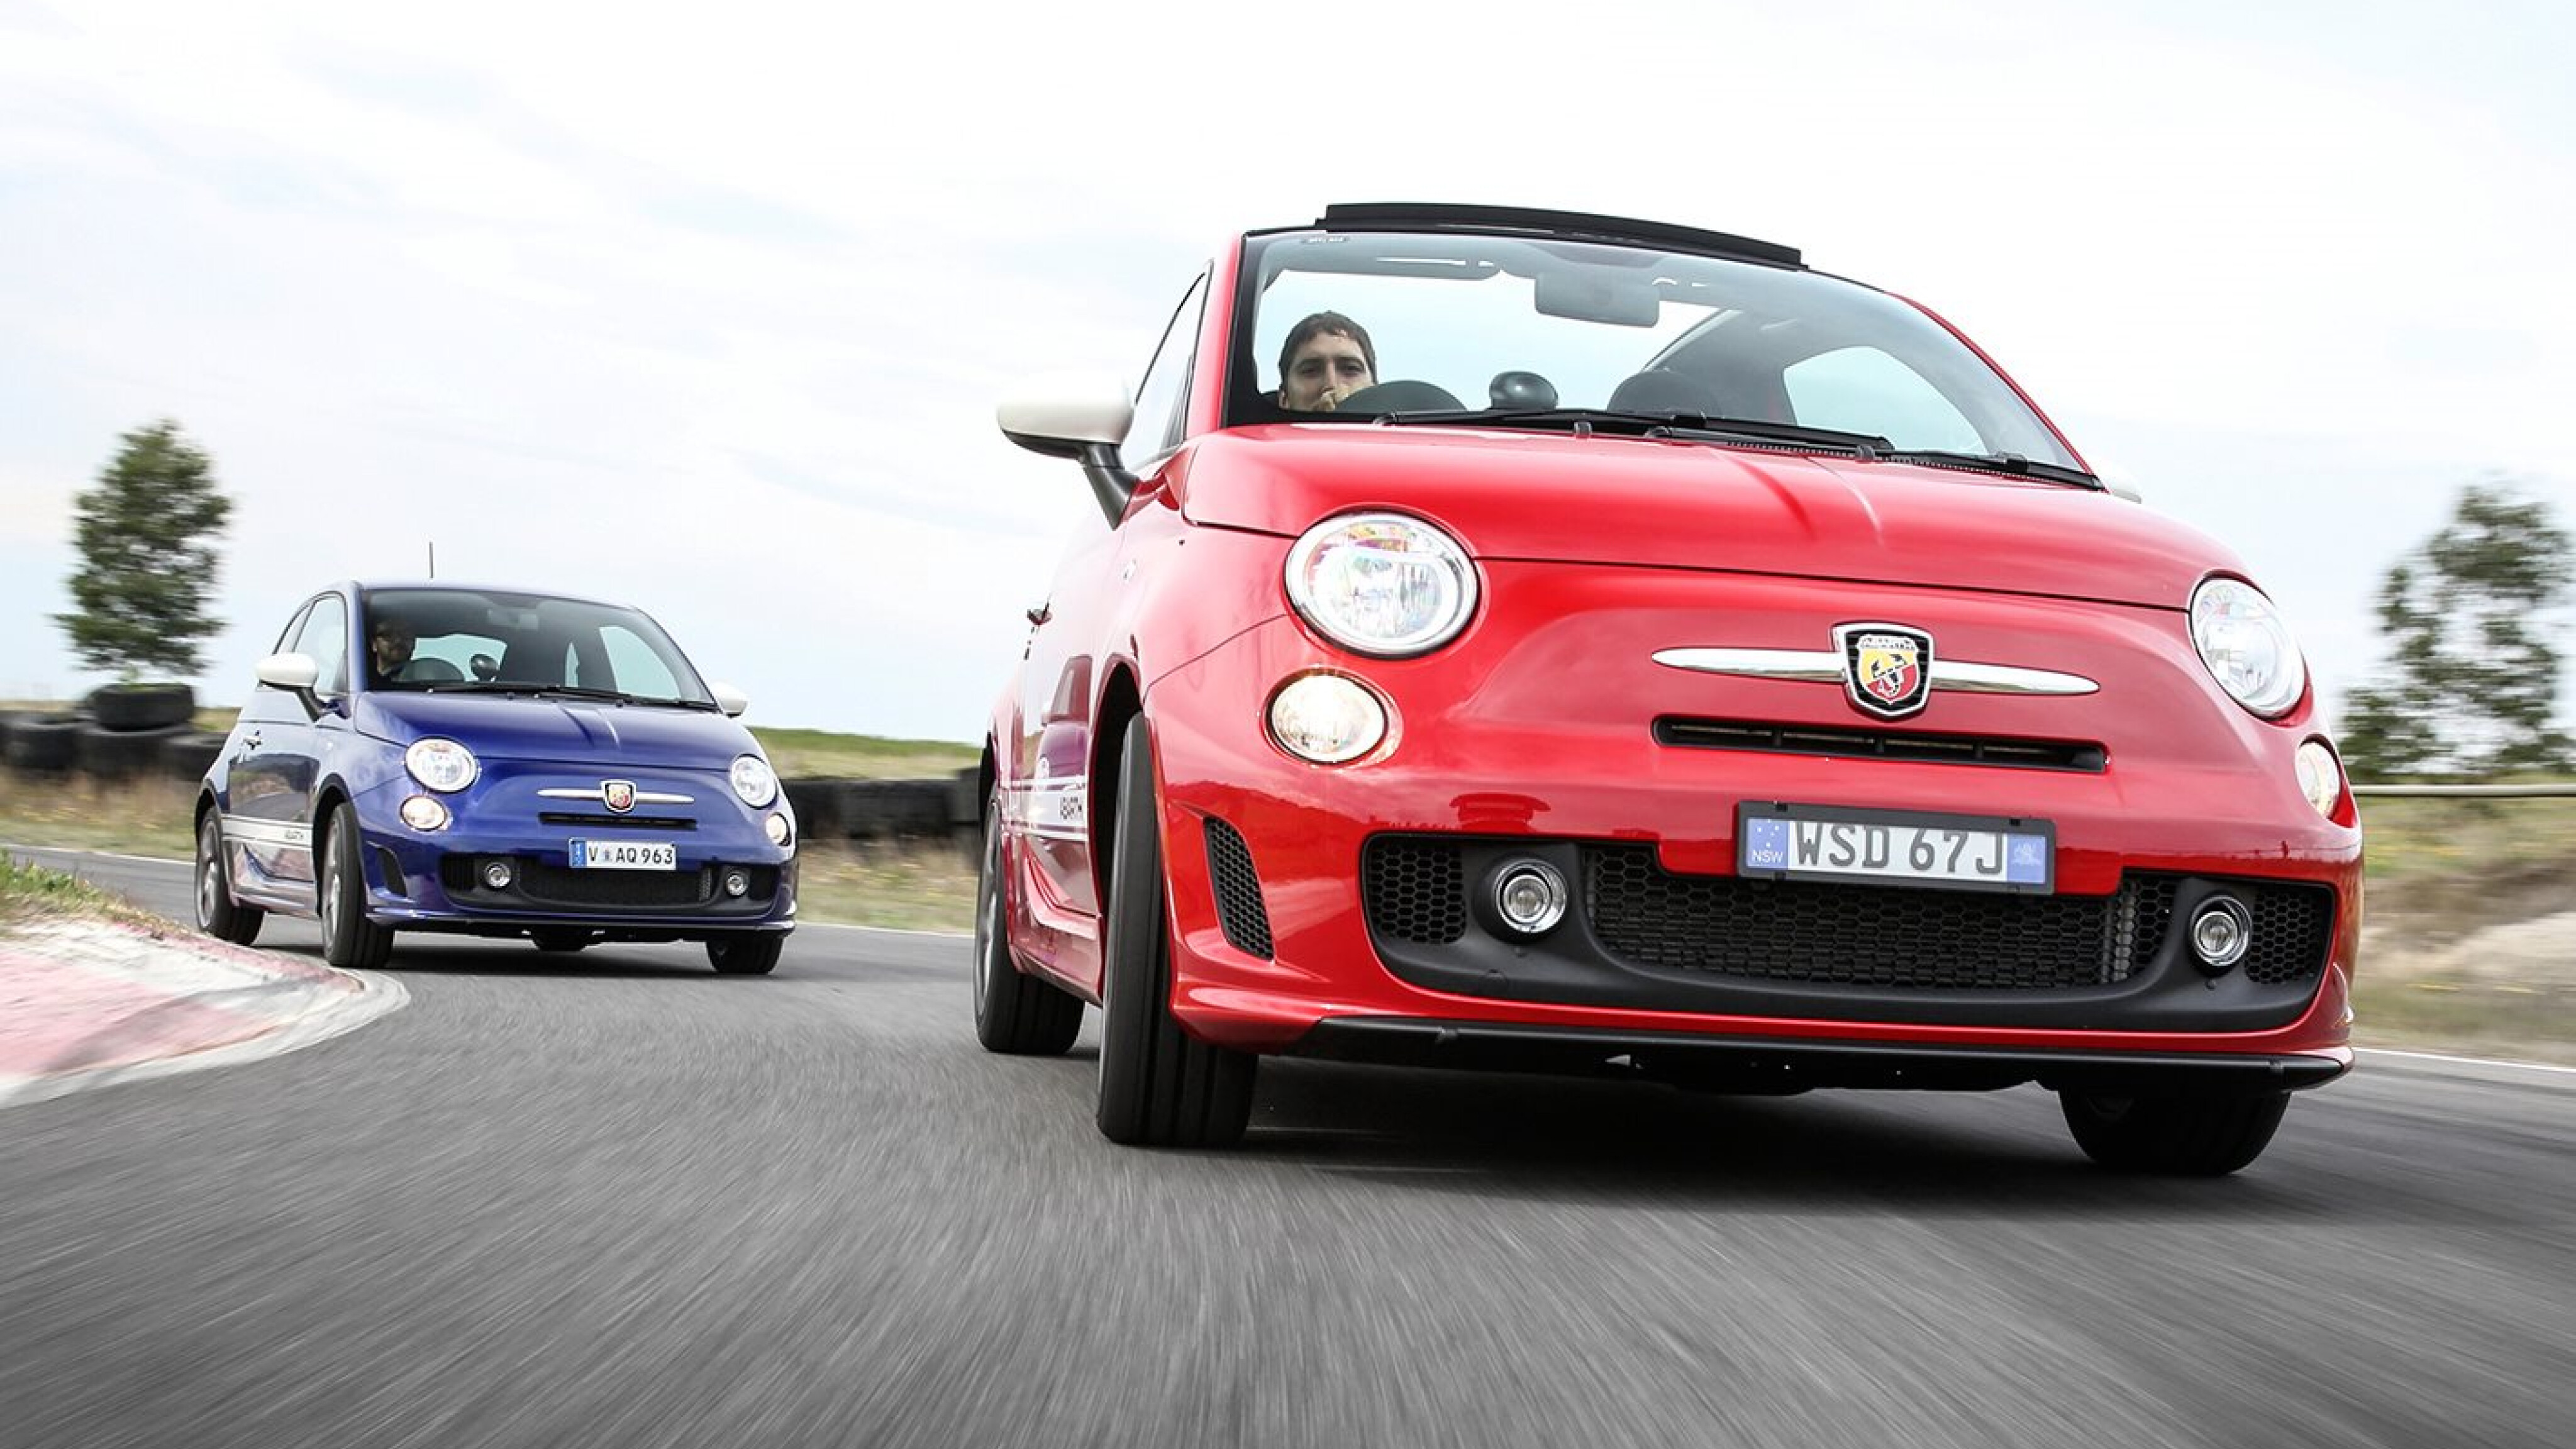 Abarth 595 review - how does it compare to the Up GTI? - Ride and handling